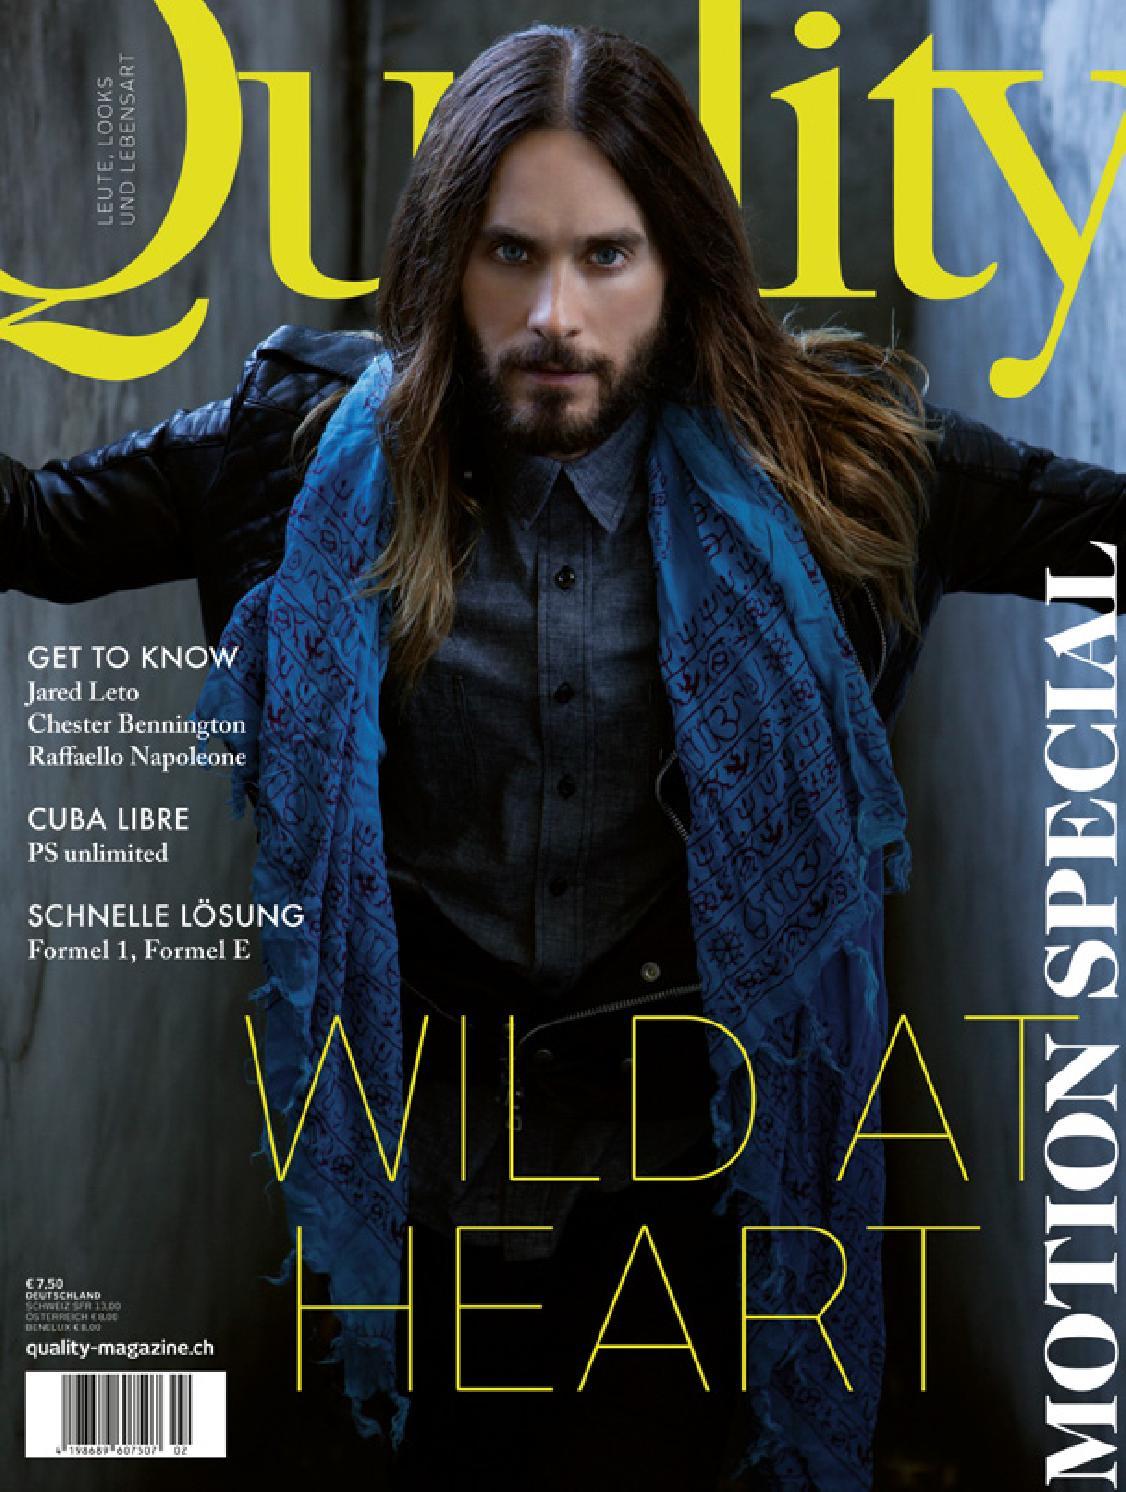 25 septembre 2014 - Jared @Quality magazine (Allemagne) Tumblr_nch1mgy9dk1r1fjqlo4_1280